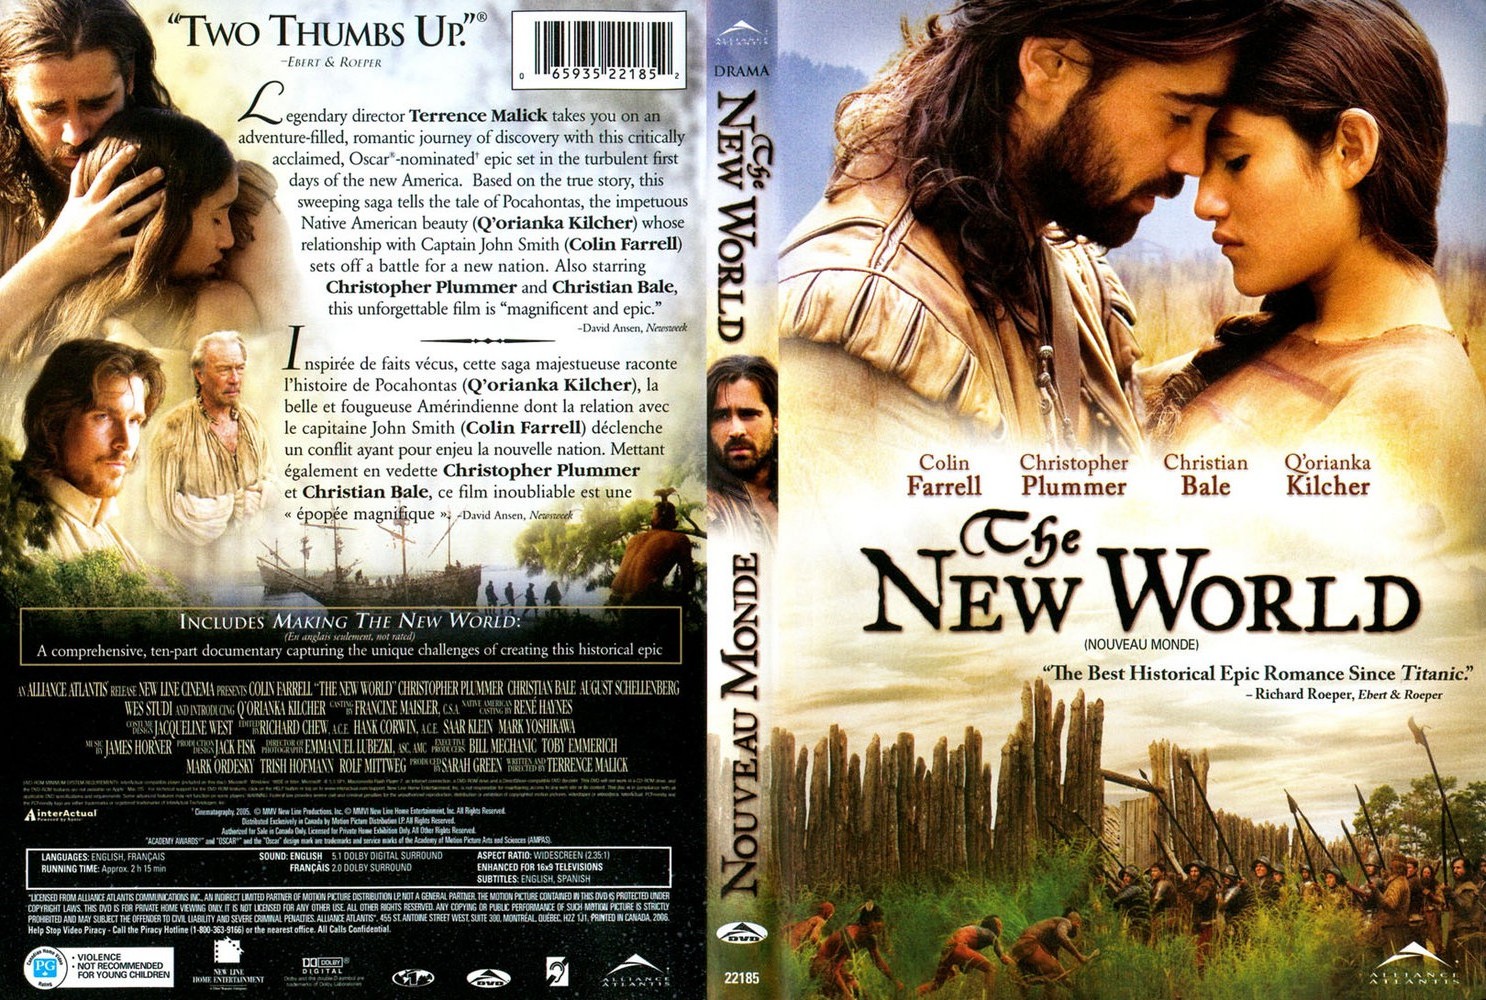 Jaquette DVD The new world